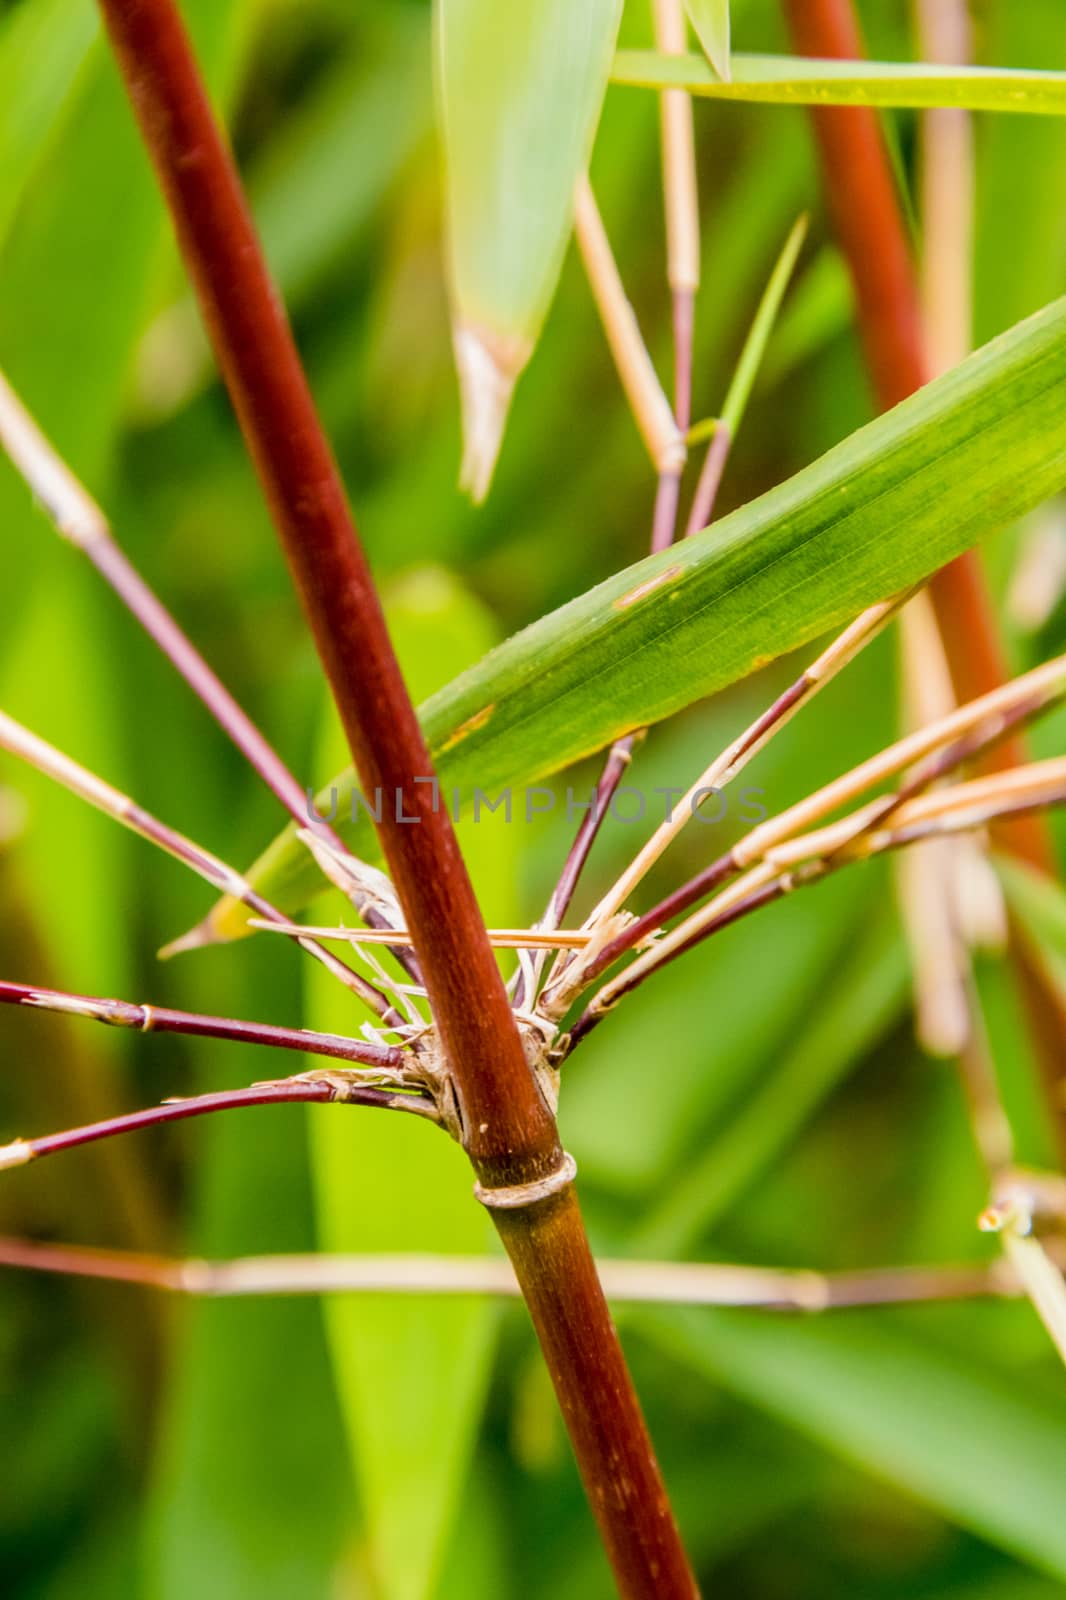 Red orange asian bamboo stalk with green leafs by MXW_Stock